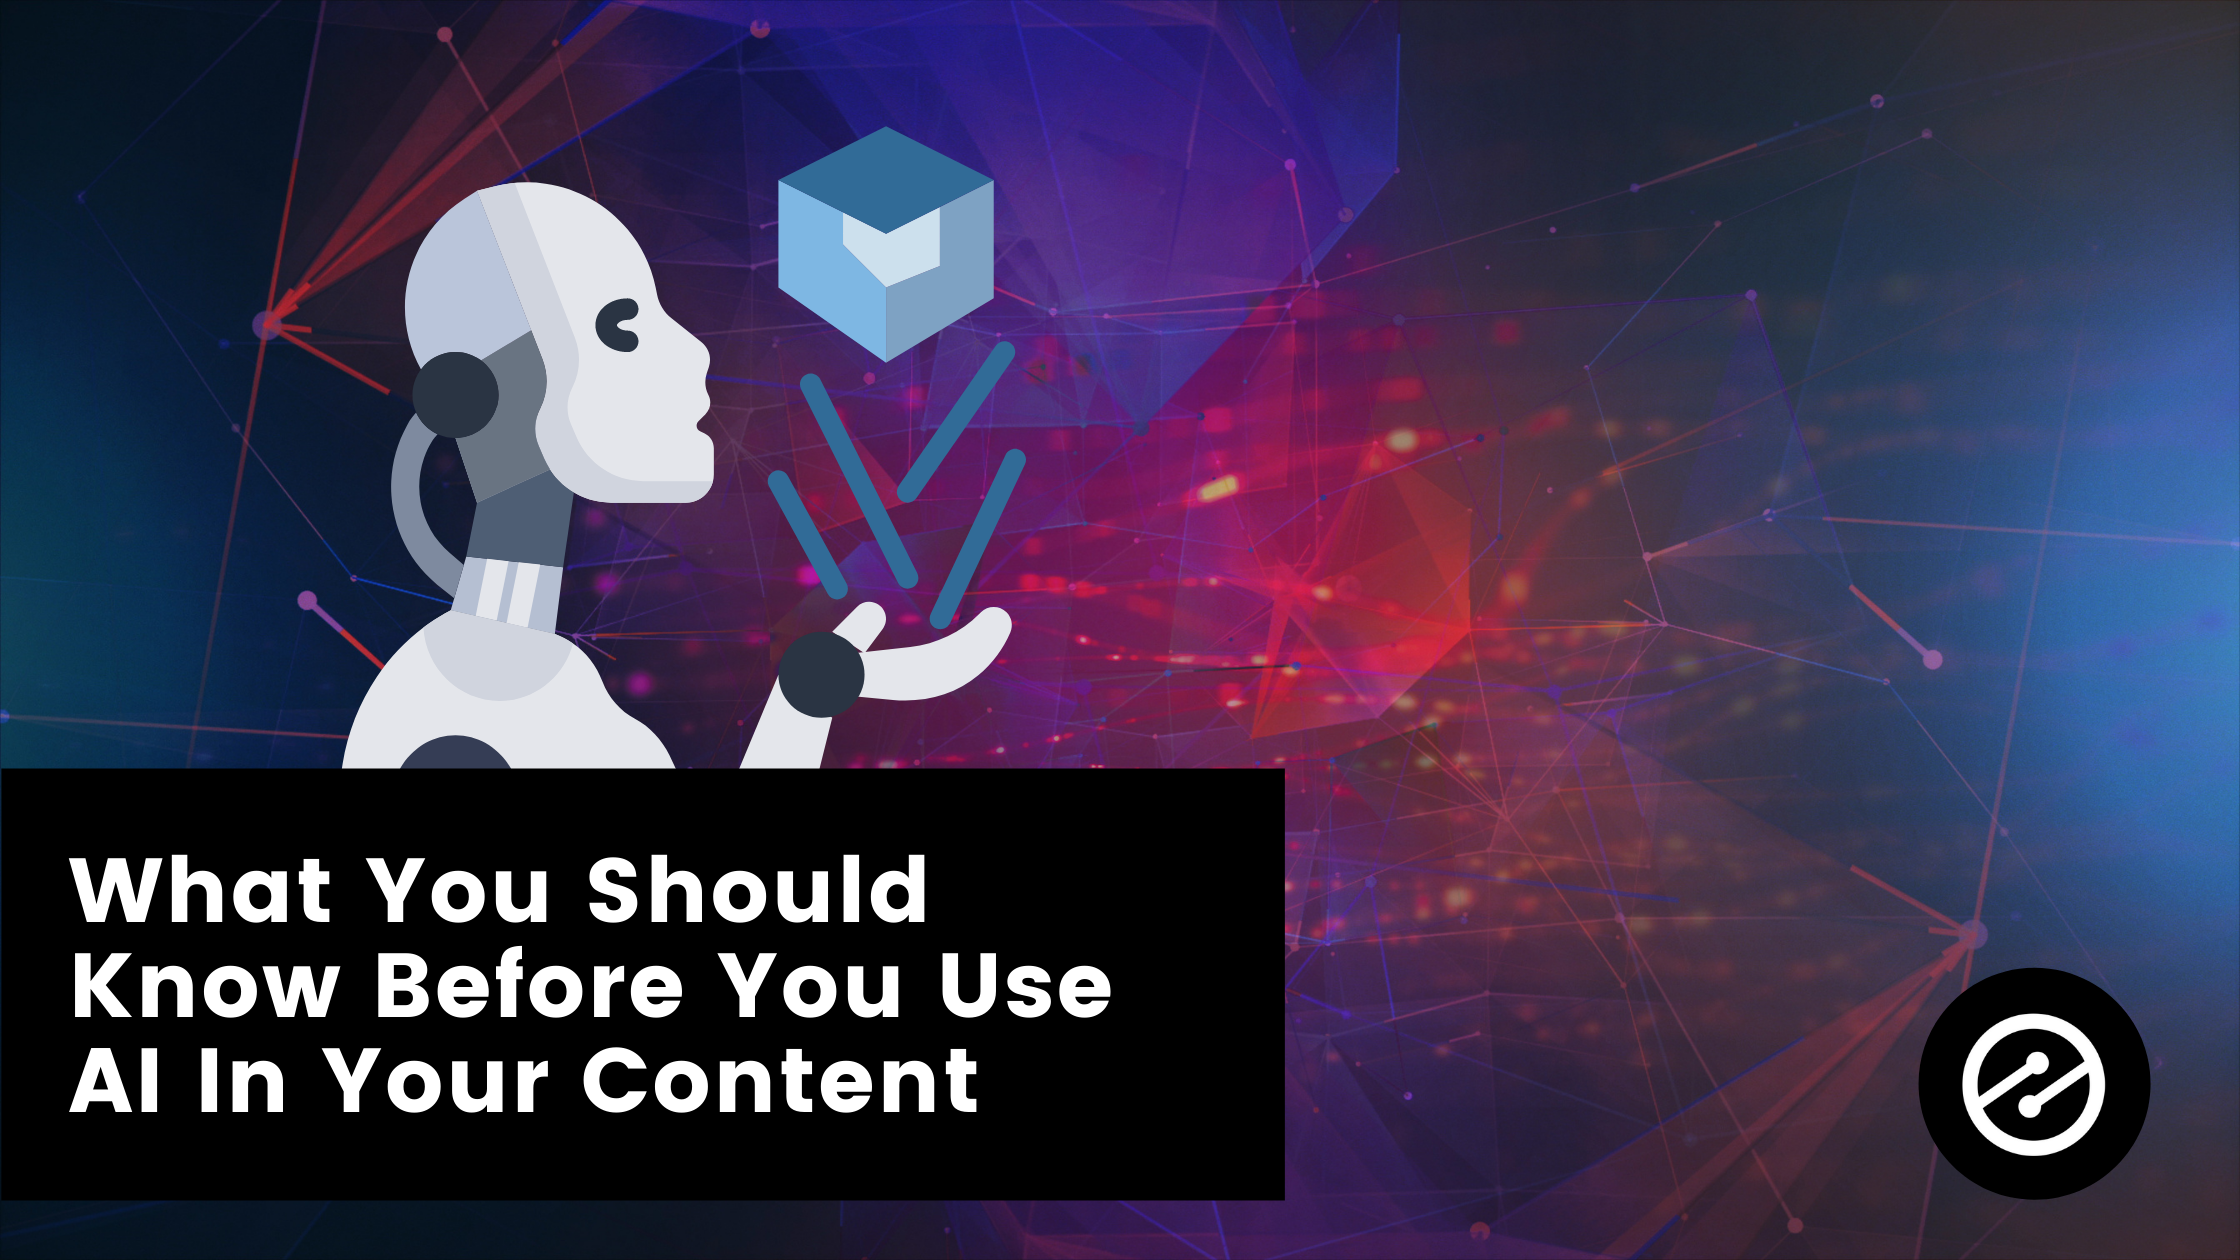 What You Should Know Before You Use AI to Create Content